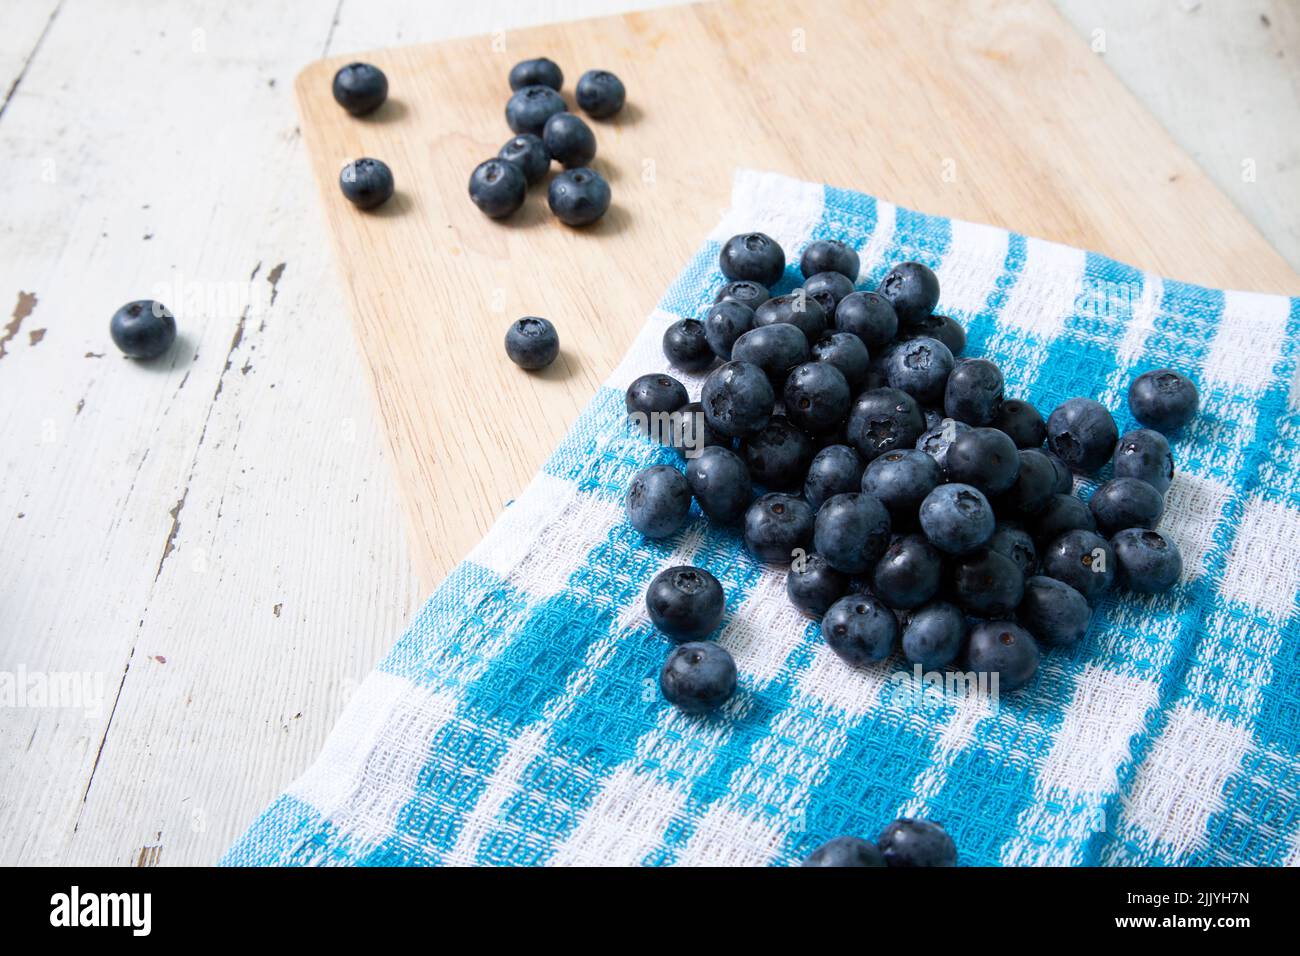 Blueberries on a napkin with a checkered pattern on a wooden table Stock Photo